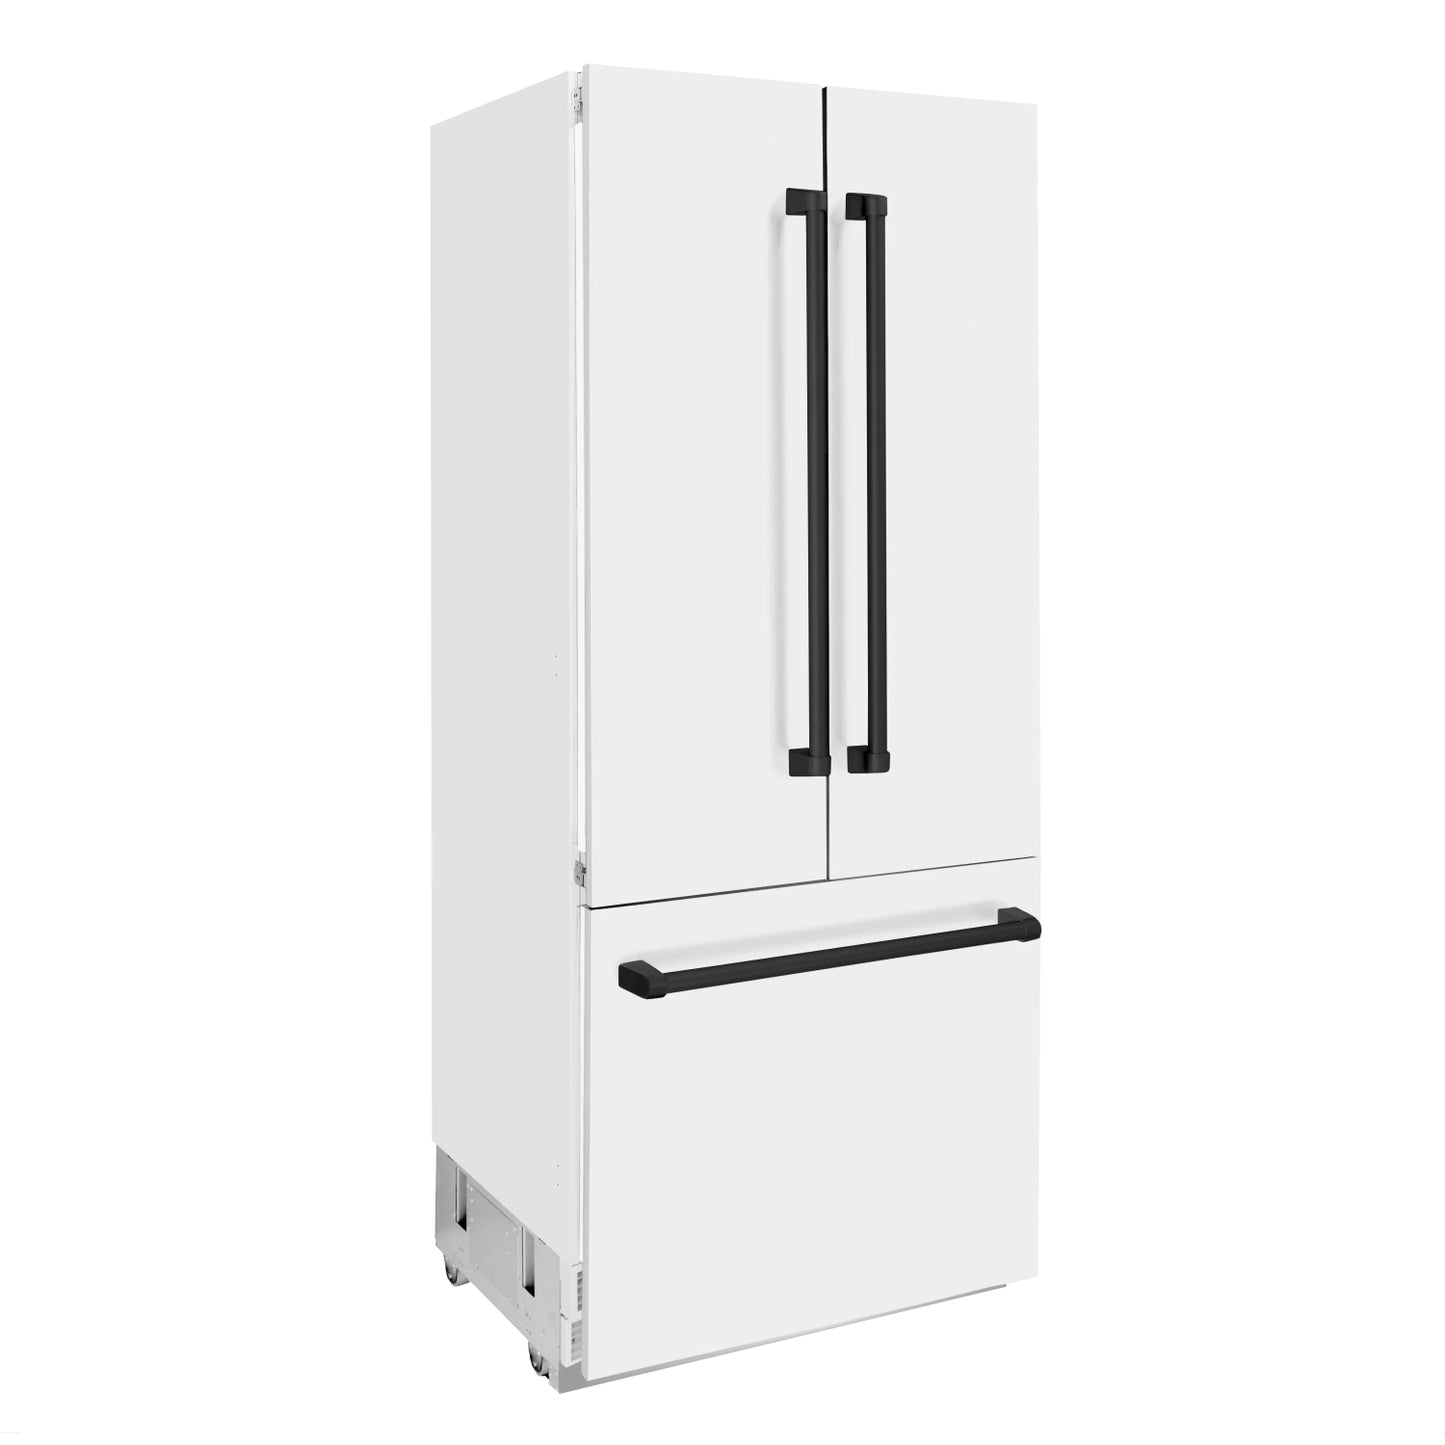 ZLINE 36 in. Autograph Edition Built-in Refrigerator - 19.6 cu. ft. - White and Black Matte Accents